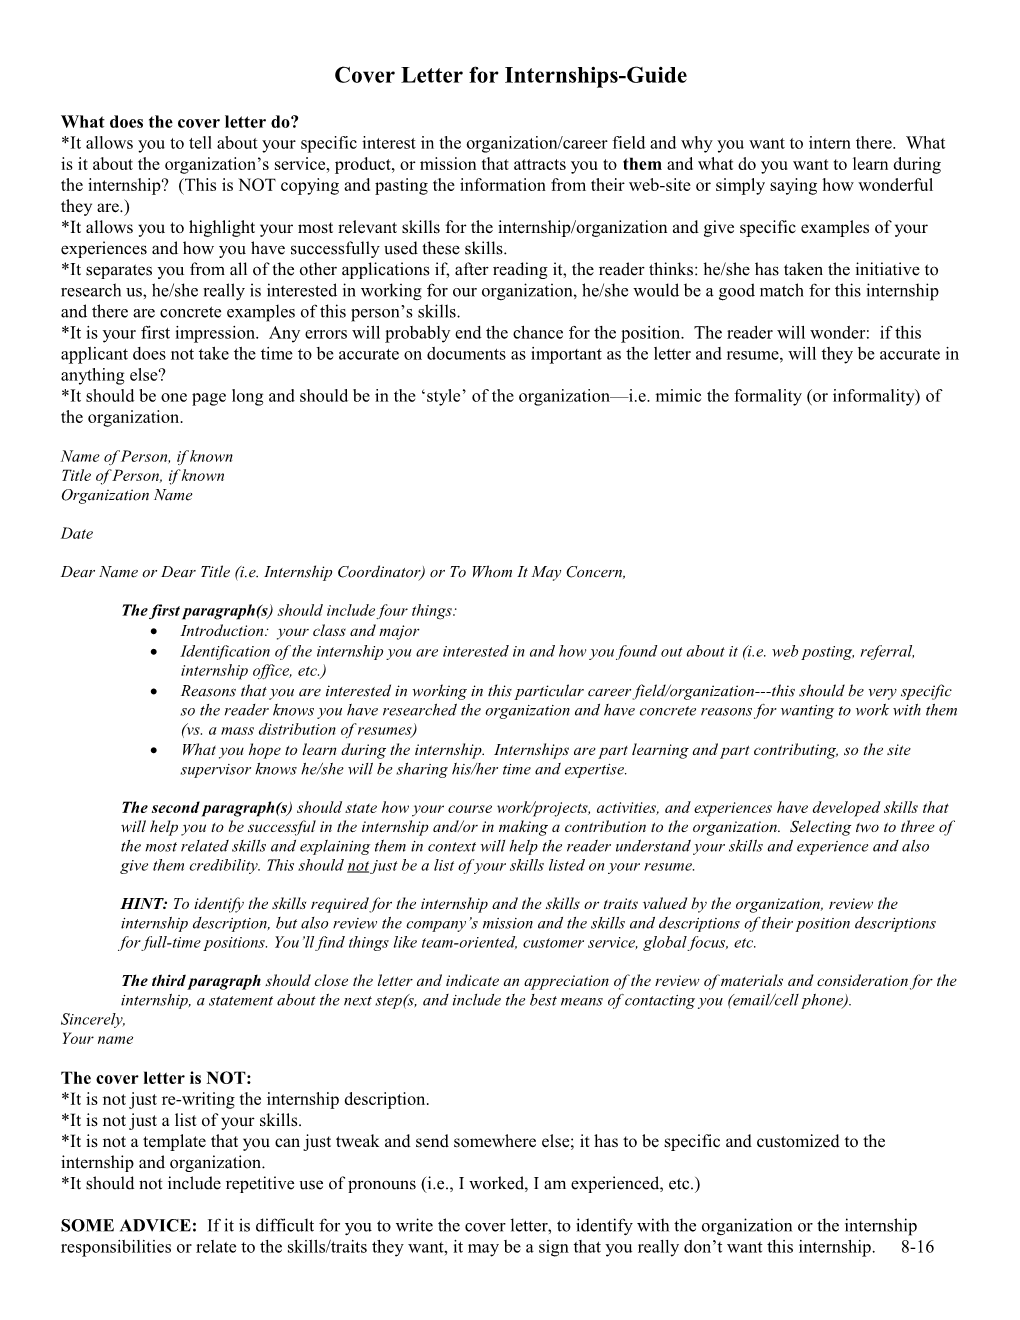 Here Is a Guide to an Internship Cover Letter